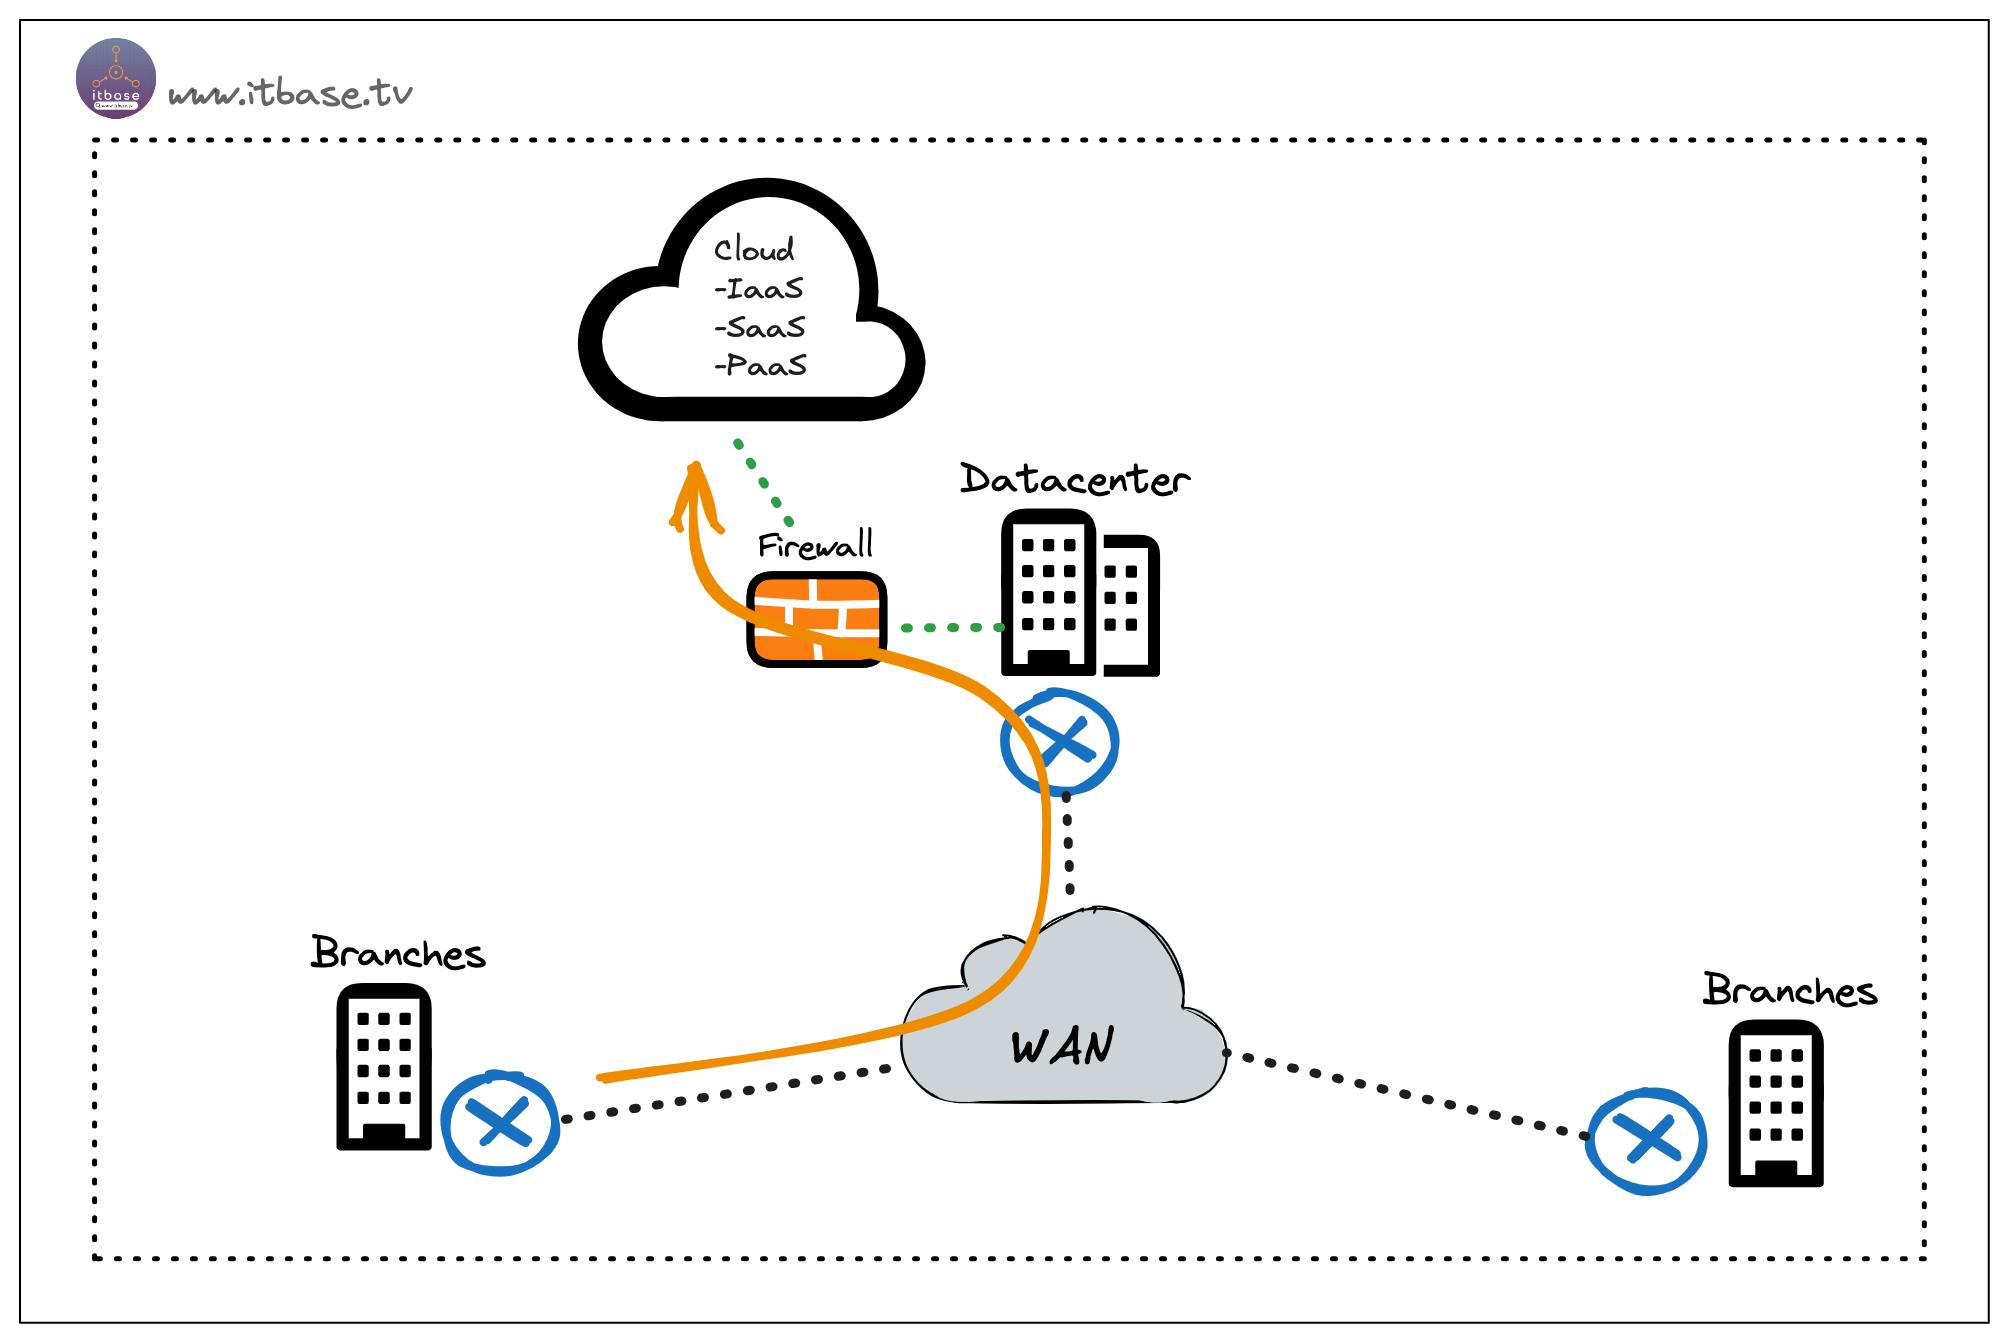 Figure 1. Traffic is forced through Hub site to get Cloud Access